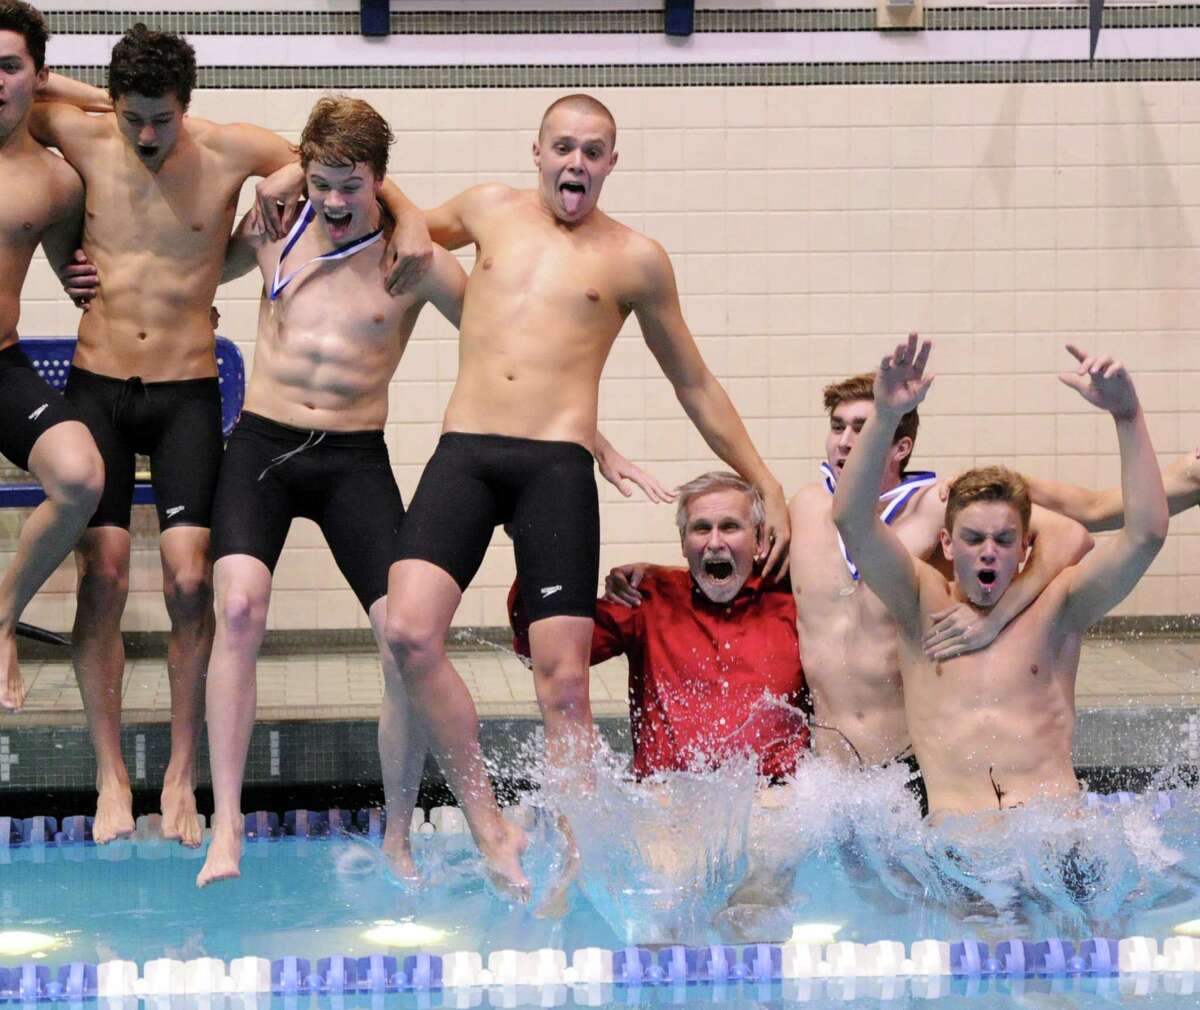 Greenwich High School swim coach, Terry Lowe, third from right, and his Greenwich High School swim team, jump into the pool after winning the State Open Boys High School Swimming Championships at Yale University, New Haven, Conn., Saturday, March 22, 2014.